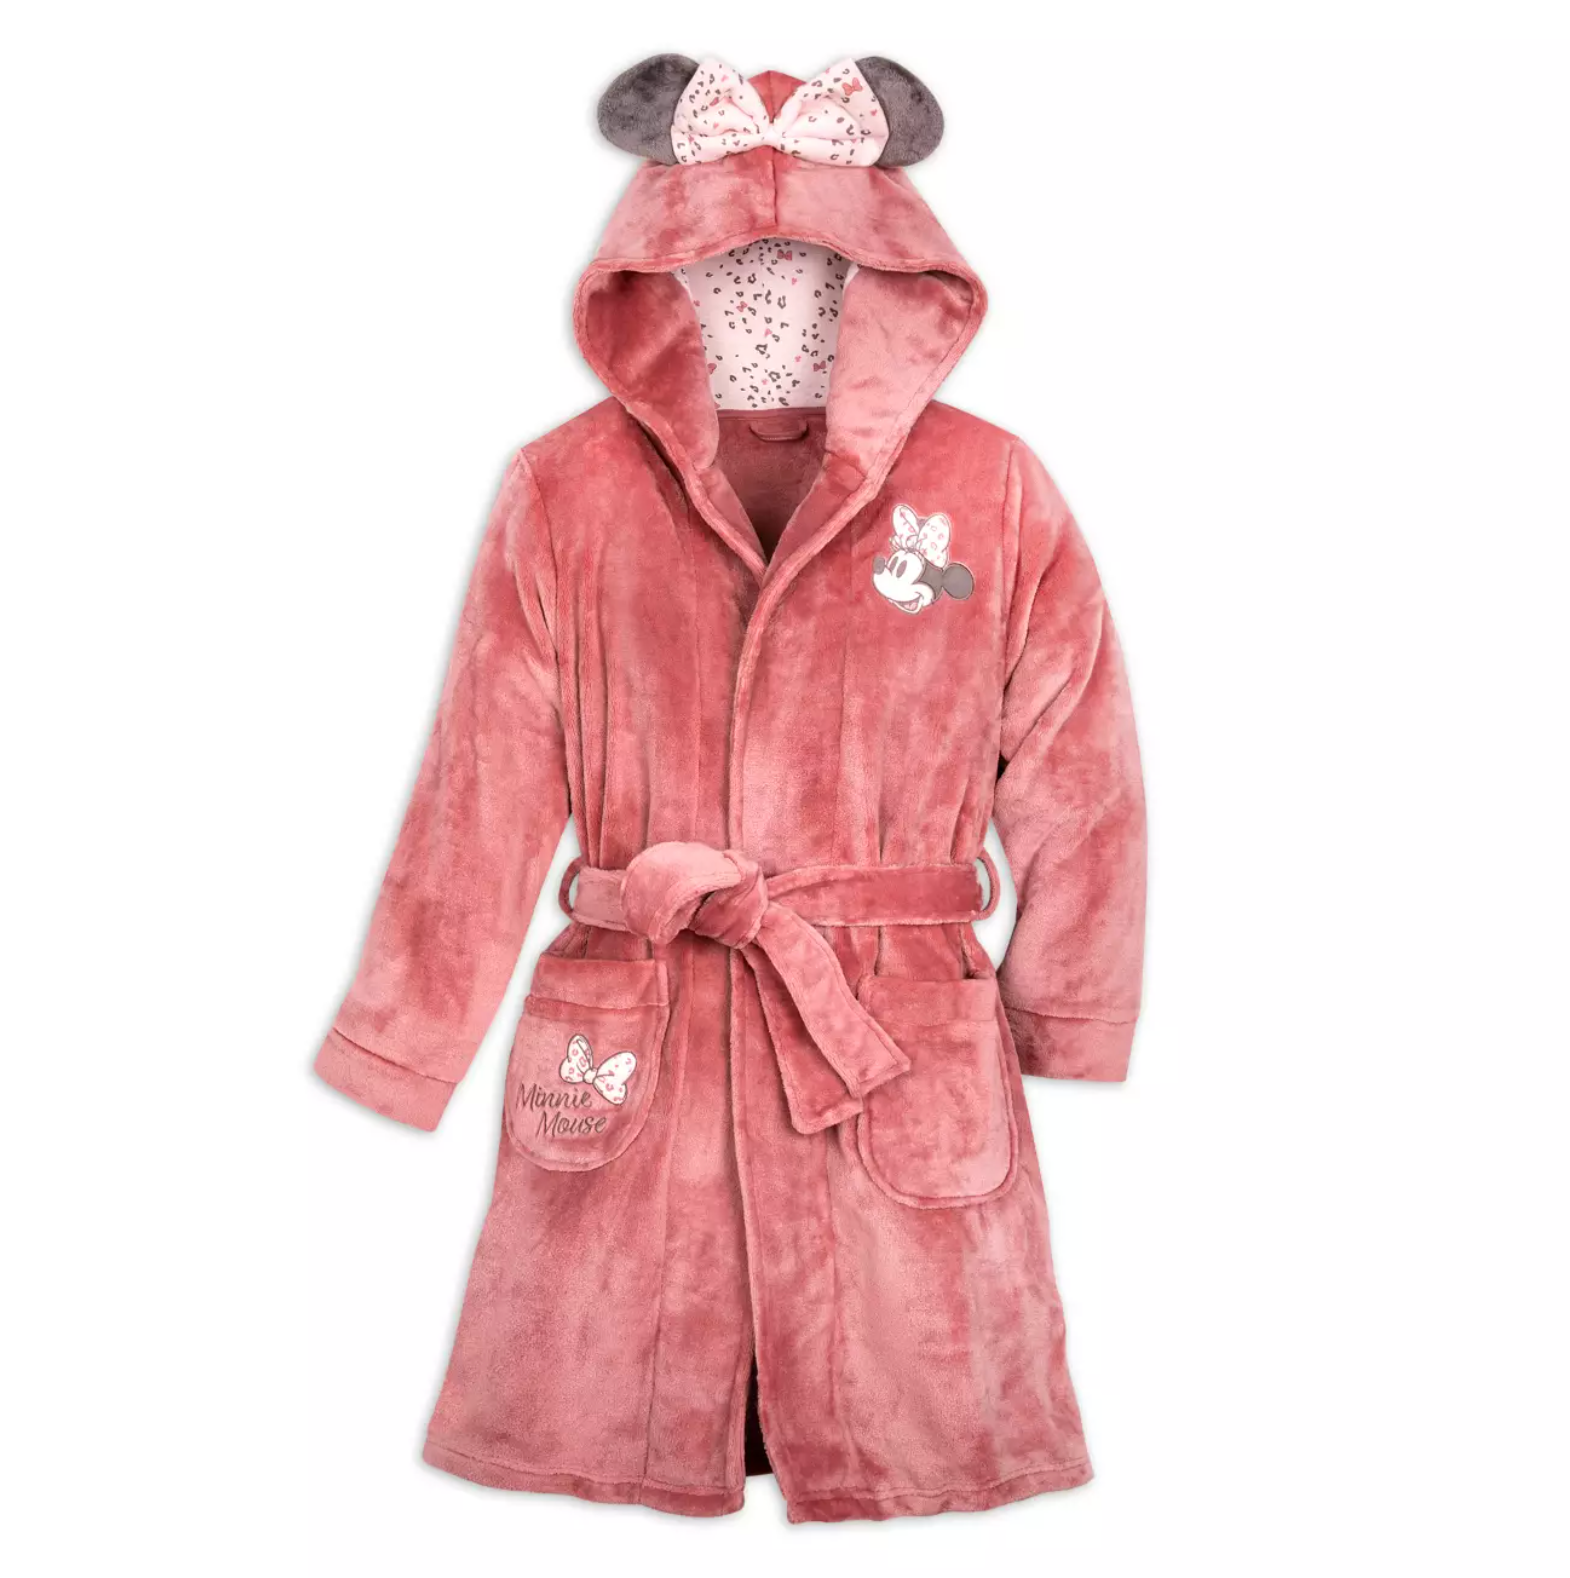 Minnie Mouse robe for adults